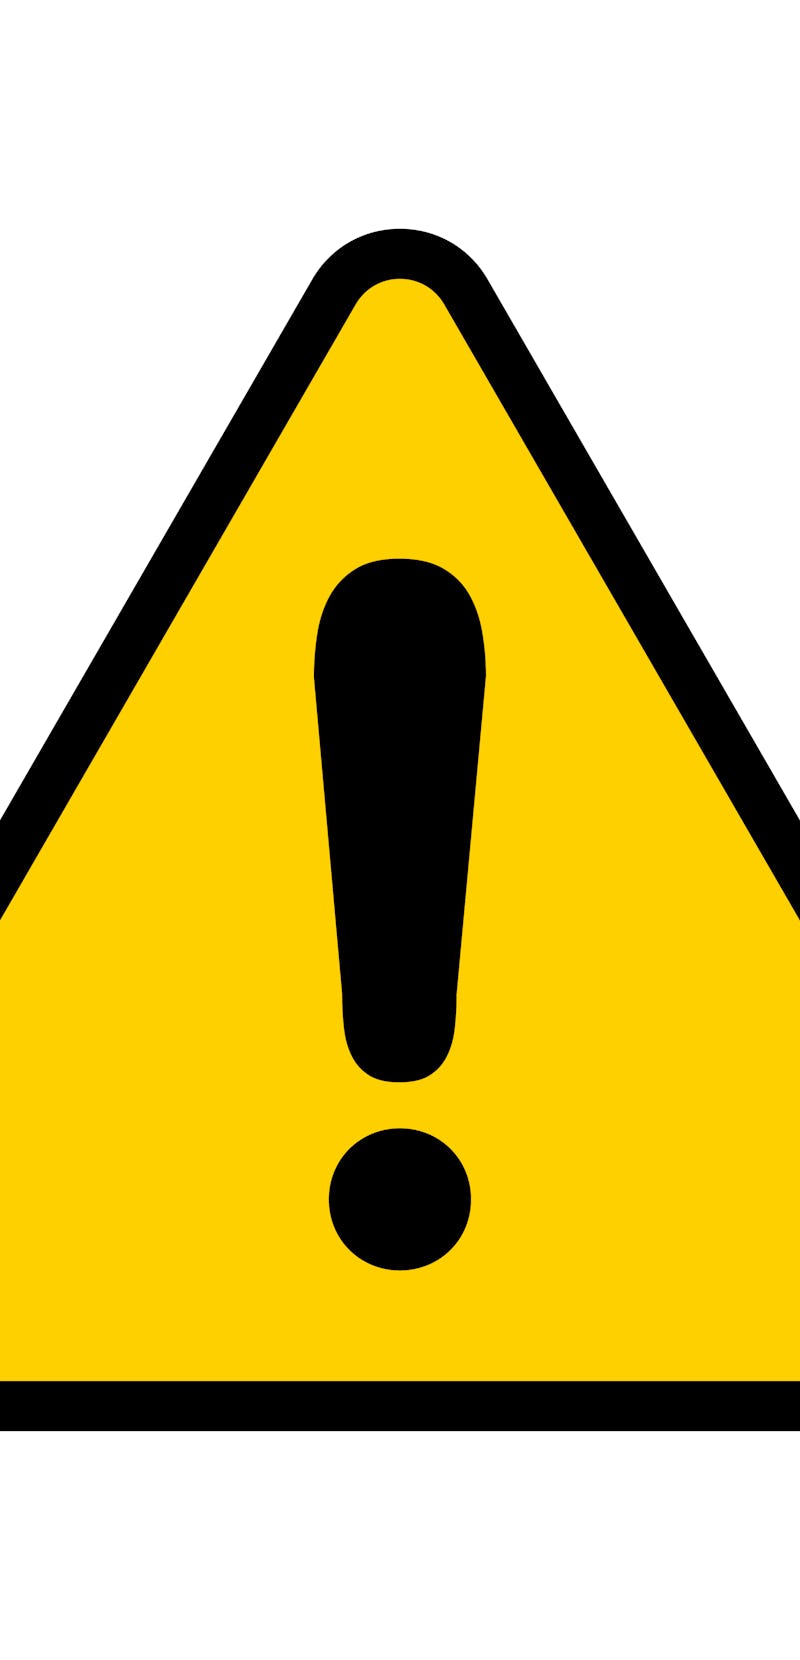 Attention icon. Warning sign. Exclamation point. Vector illustration